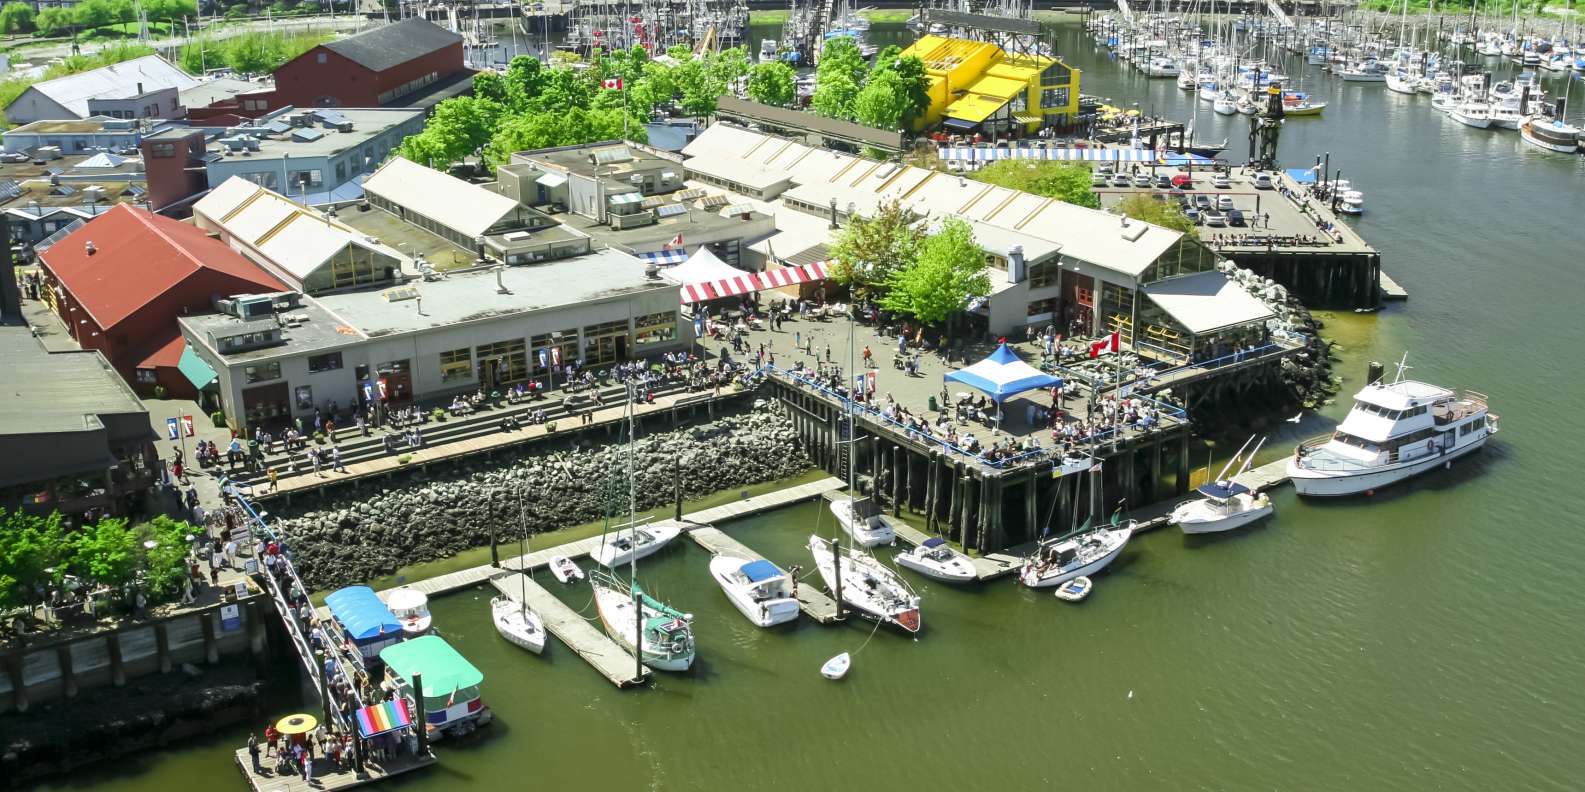 The BEST Granville Island Cable car tours 2022 - FREE Cancellation